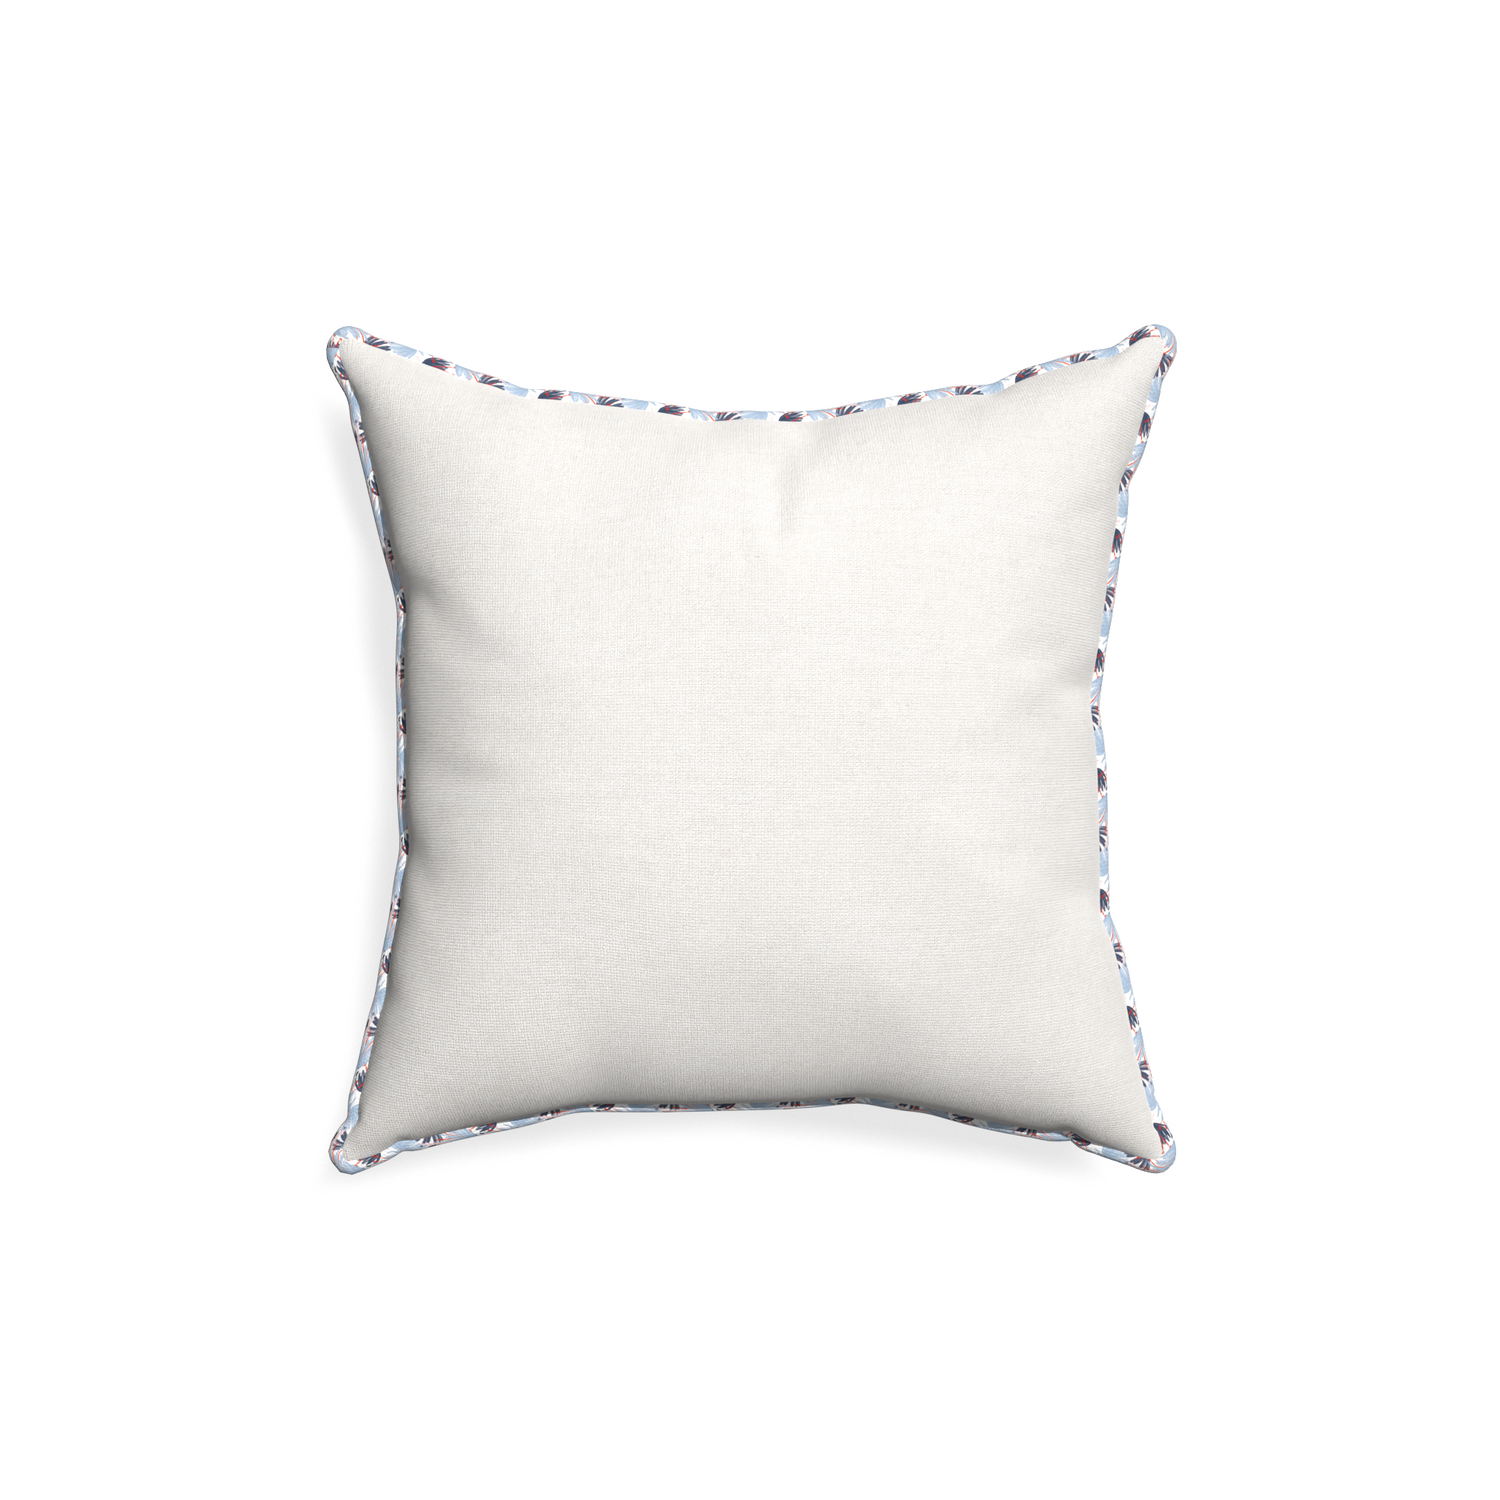 18-square flour custom pillow with e piping on white background